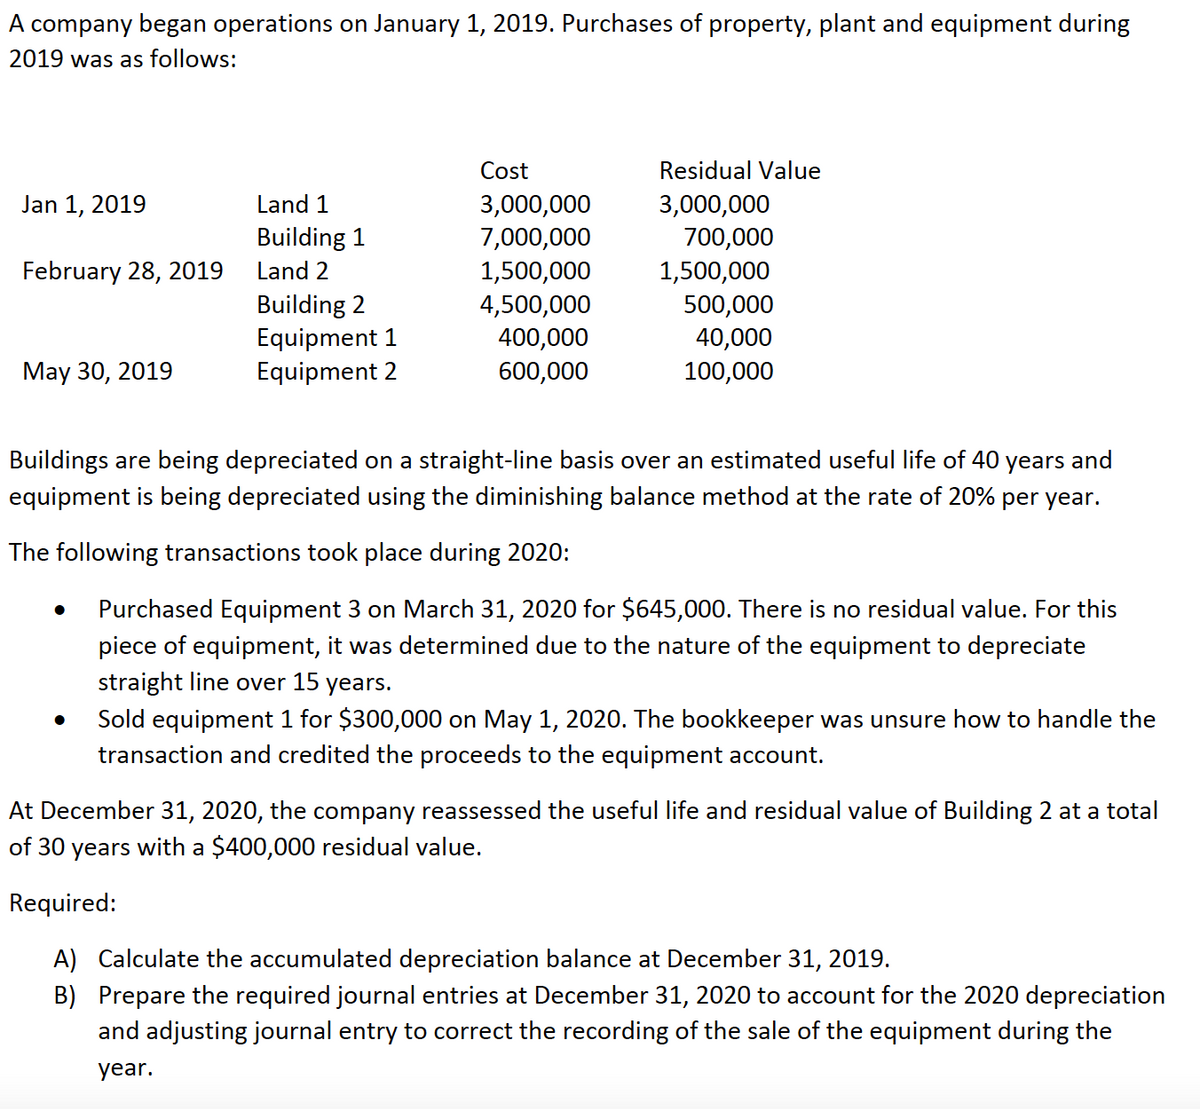 A company began operations on January 1, 2019. Purchases of property, plant and equipment during
2019 was as follows:
Cost
Residual Value
Jan 1, 2019
Land 1
3,000,000
7,000,000
3,000,000
700,000
Building 1
February 28, 2019
Land 2
1,500,000
1,500,000
Building 2
Equipment 1
Equipment 2
4,500,000
400,000
500,000
40,000
Мау 30, 2019
600,000
100,000
Buildings are being depreciated on a straight-line basis over an estimated useful life of 40 years and
equipment is being depreciated using the diminishing balance method at the rate of 20% per year.
The following transactions took place during 2020:
Purchased Equipment 3 on March 31, 2020 for $645,000. There is no residual value. For this
piece of equipment, it was determined due to the nature of the equipment to depreciate
straight line over 15 years.
Sold equipment 1 for $300,000 on May 1, 2020. The bookkeeper was unsure how to handle the
transaction and credited the proceeds to the equipment account.
At December 31, 2020, the company reassessed the useful life and residual value of Building 2 at a total
of 30 years with a $400,000 residual value.
Required:
A) Calculate the accumulated depreciation balance at December 31, 2019.
B) Prepare the required journal entries at December 31, 2020 to account for the 2020 depreciation
and adjusting journal entry to correct the recording of the sale of the equipment during the
year.
